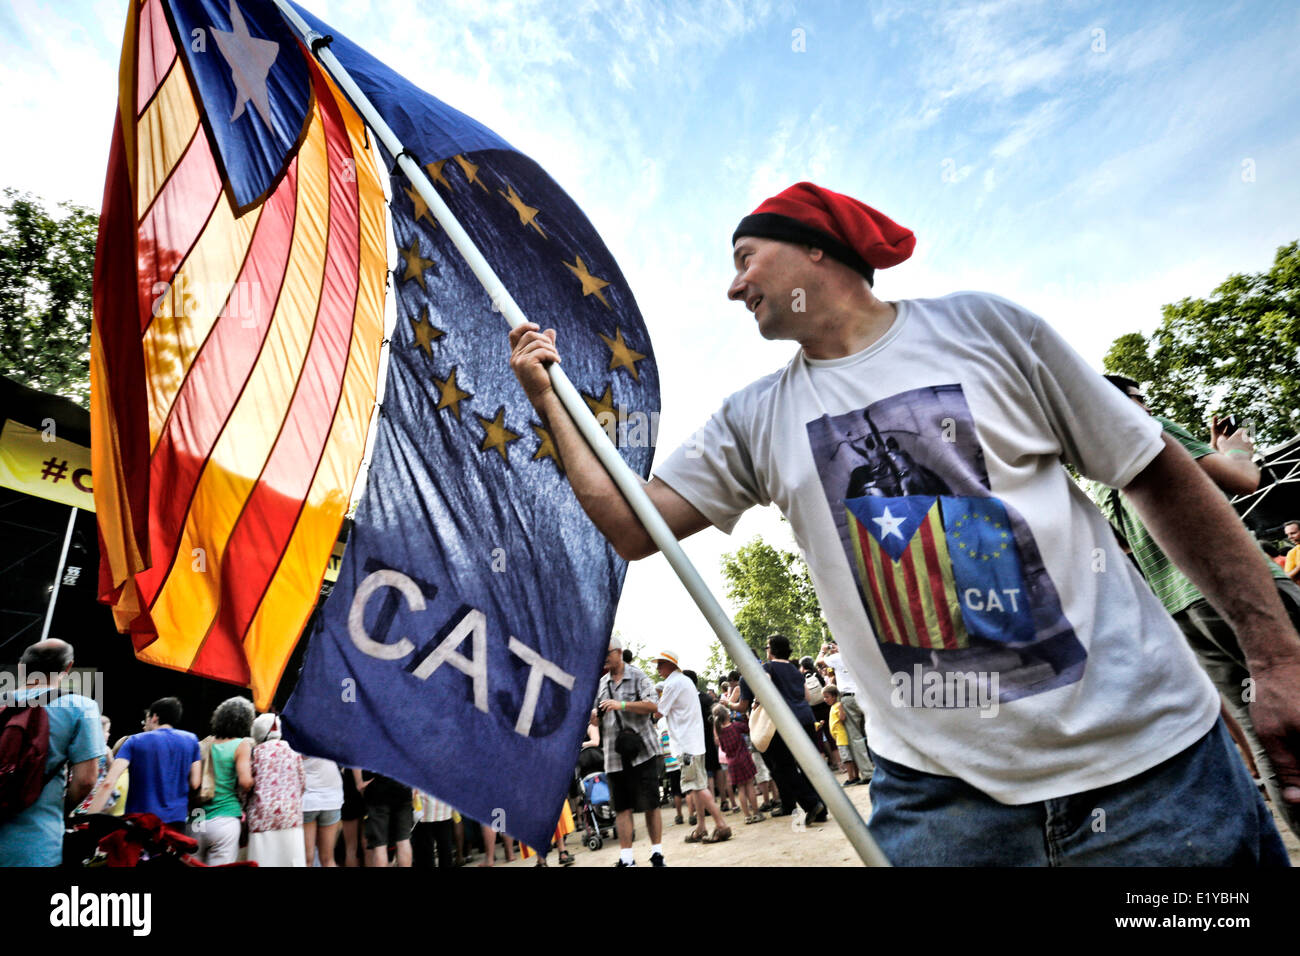 Man waving Catalan Independence Flags at a march for independence in Girona, Catalonia, Spain Stock Photo